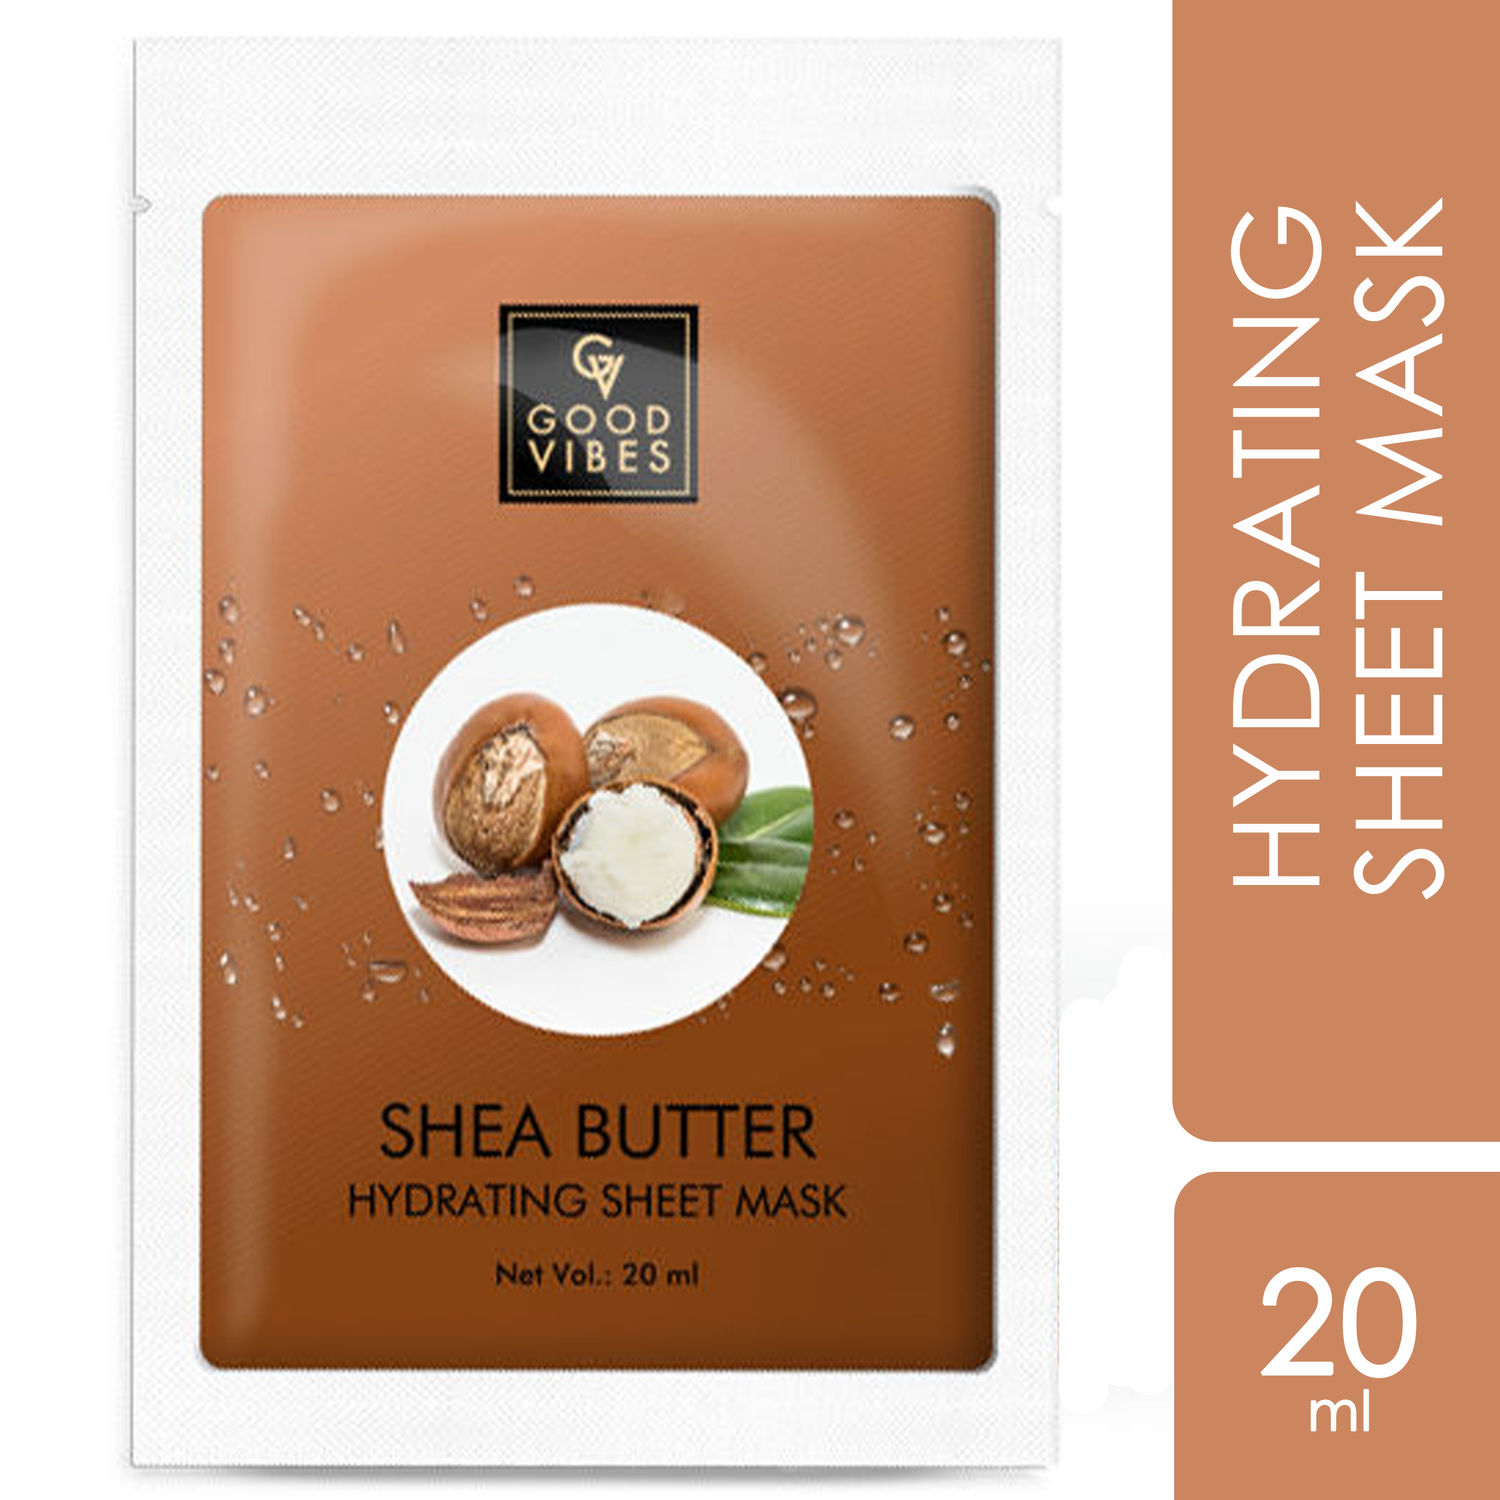 Buy Good Vibes Hydrating Sheet Mask - Shea Butter (20 ml) - Purplle